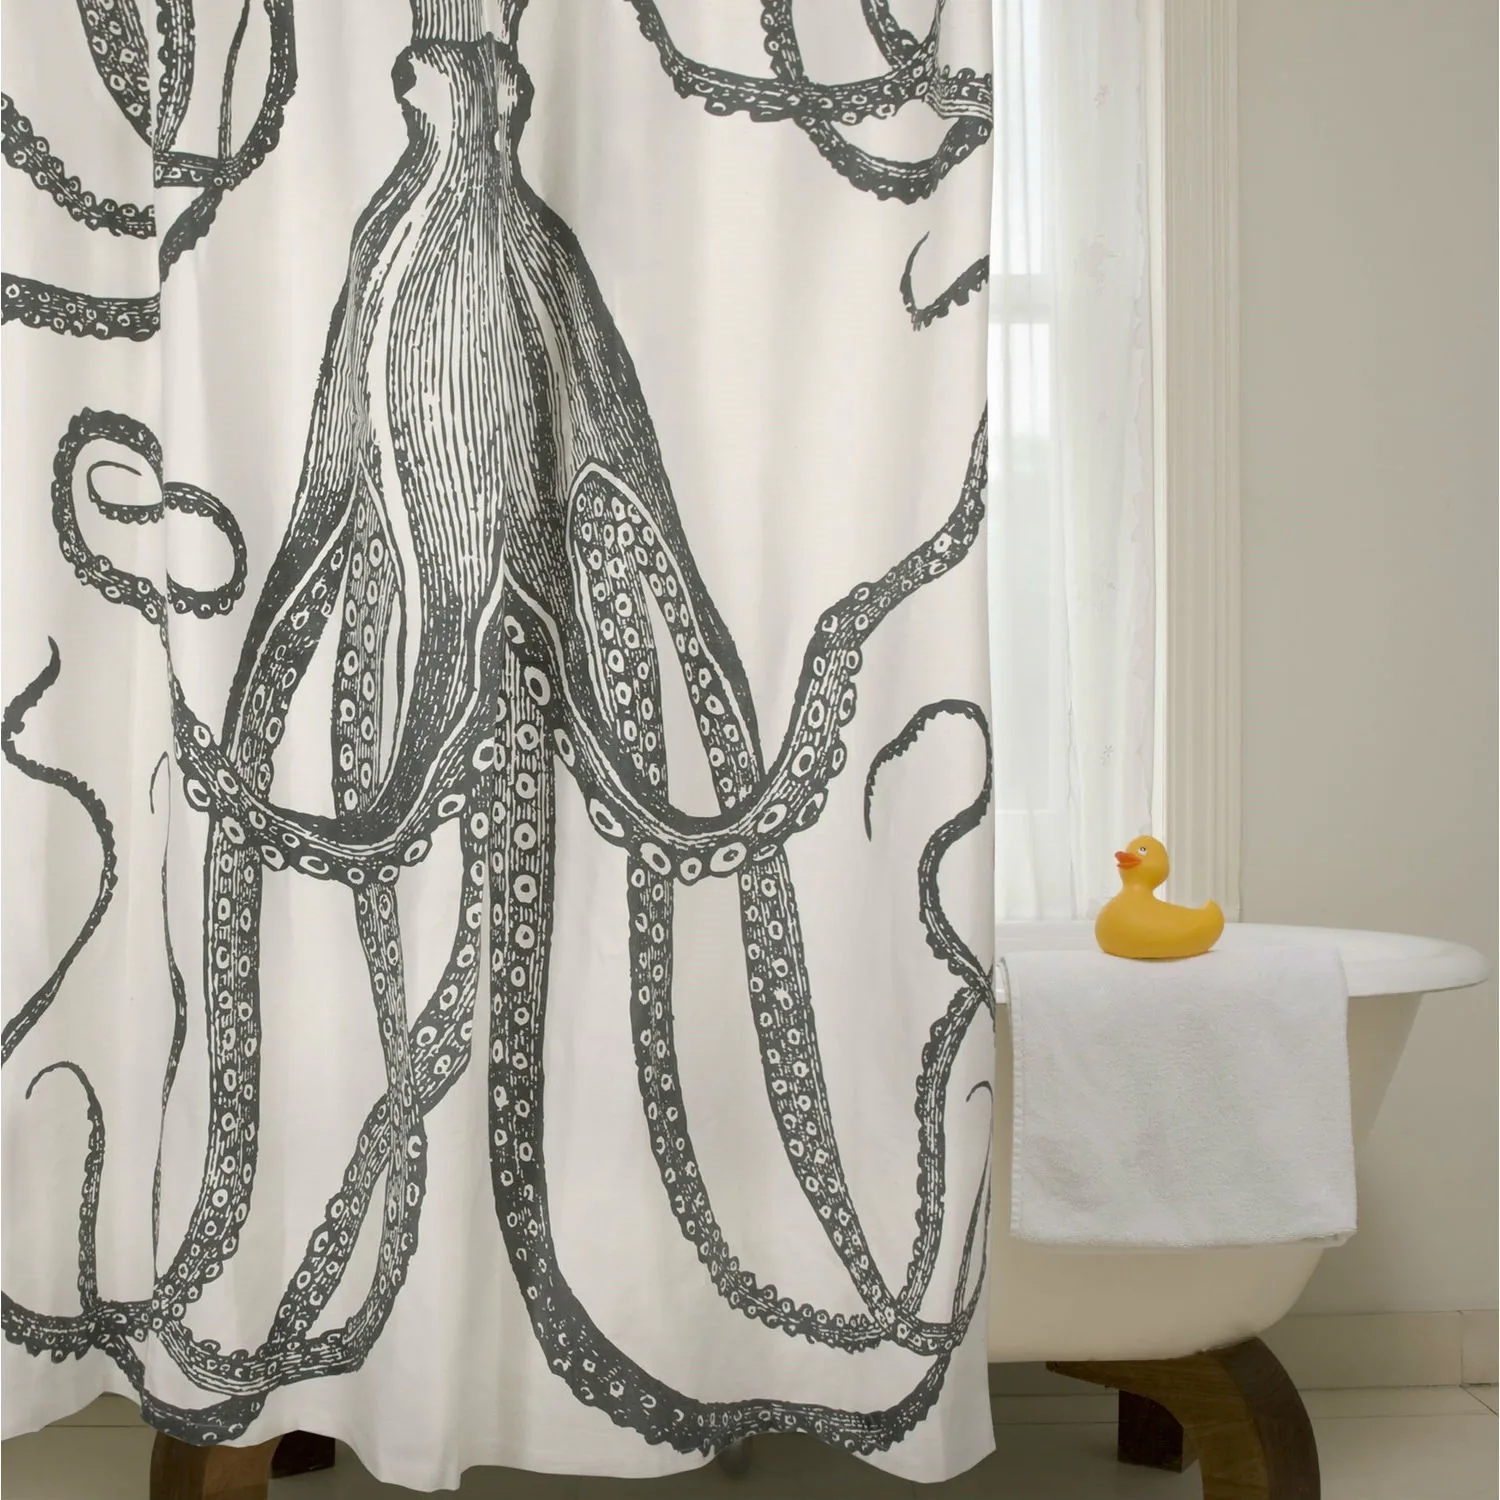 A minimalistic and stylish screen with an octopus in the bathroom will become indispensable during bathing